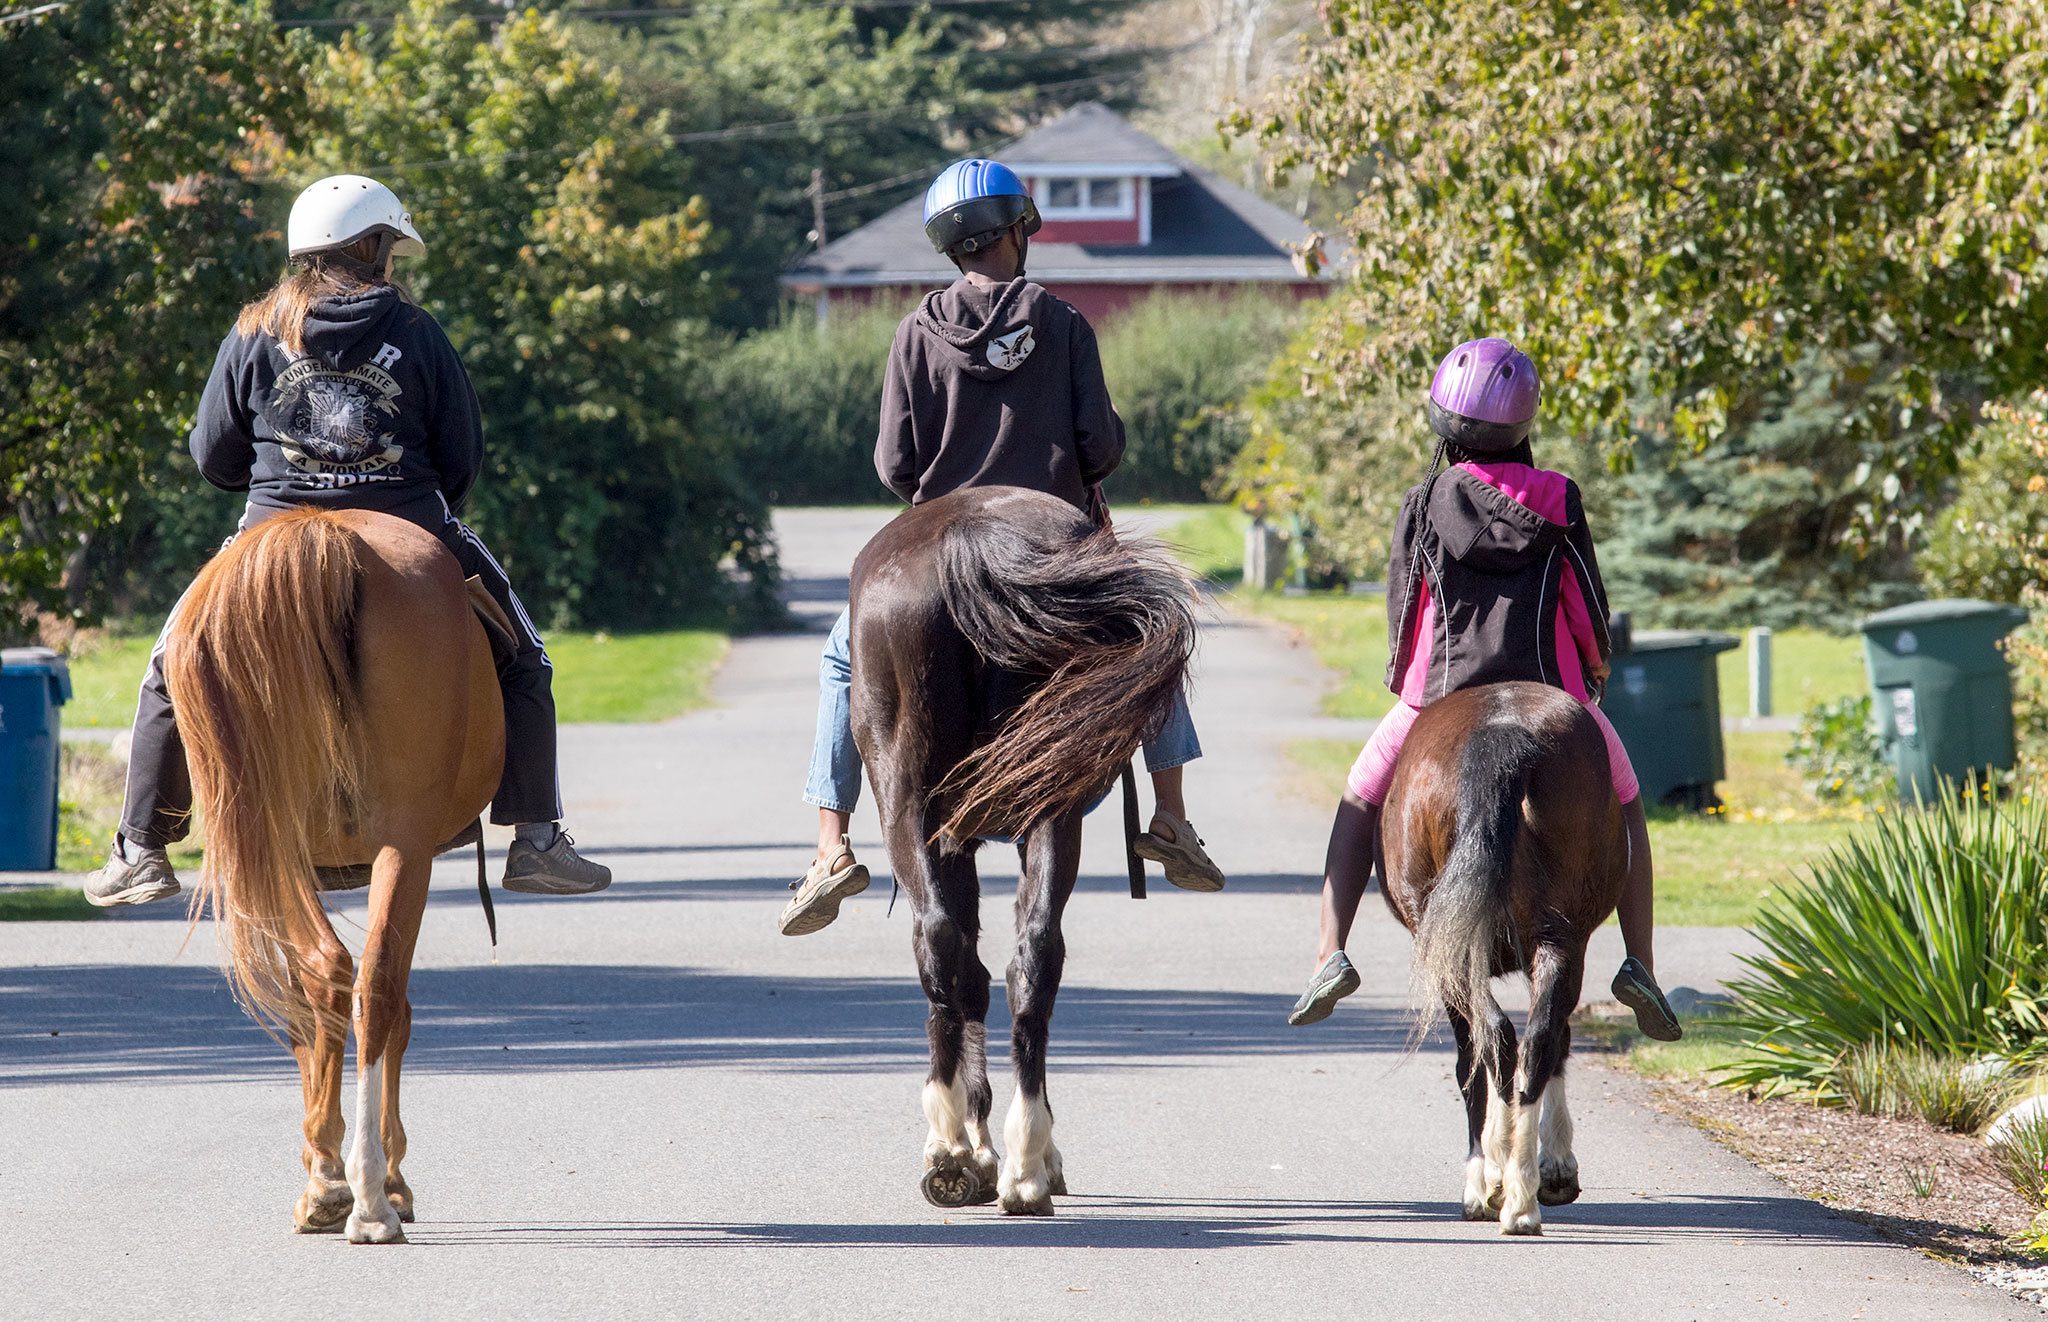 Te’onna Tobin, 12, rides her pony along with her mother, Rene Tobin, and brother, Justin, as they celebrate her birthday by riding through Startup on Tuesday. (Andy Bronson / The Herald)